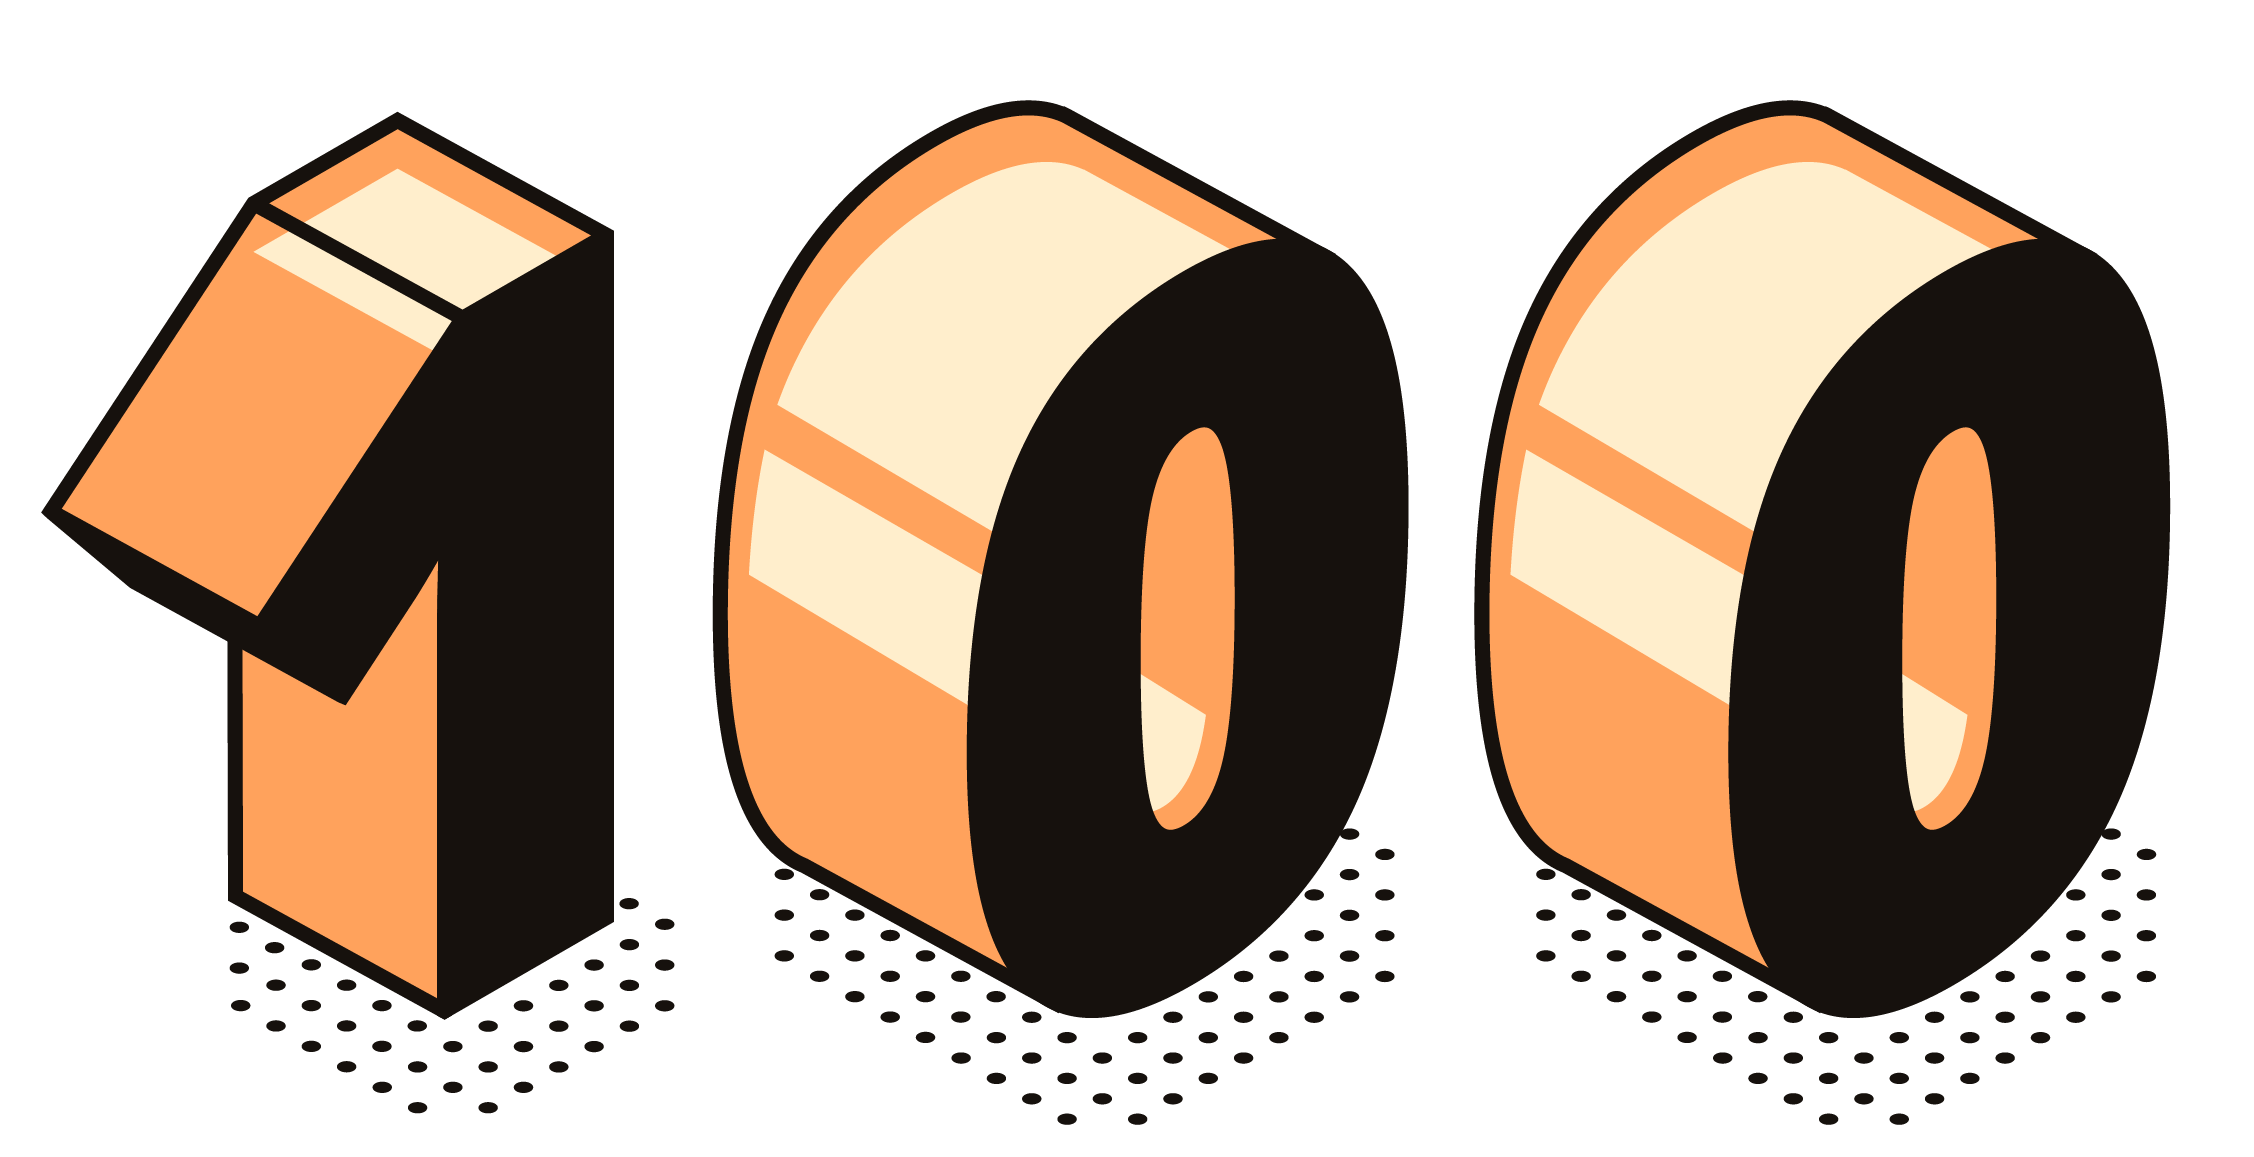 100 Number PNG Free Commercial Use Images